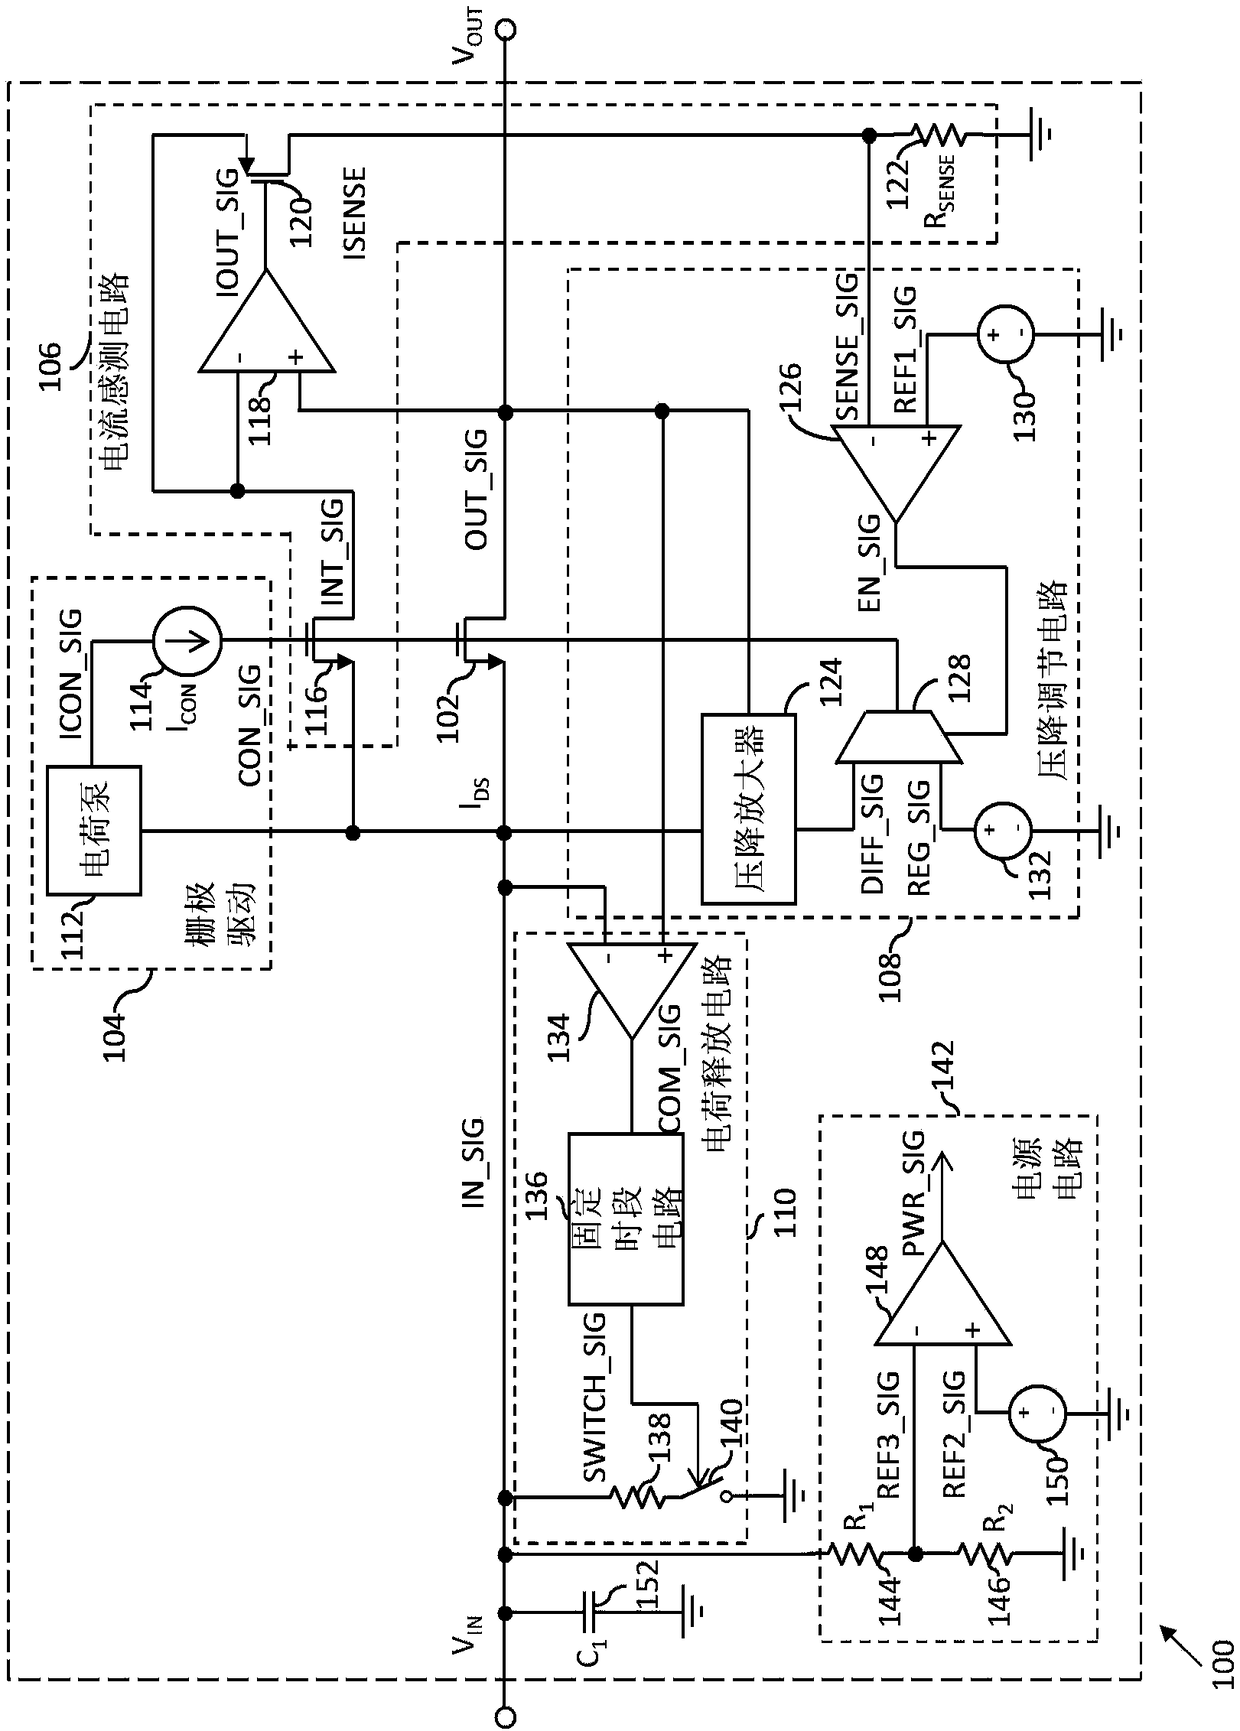 Integrated circuit with reverse current detection and power source disconnection detection